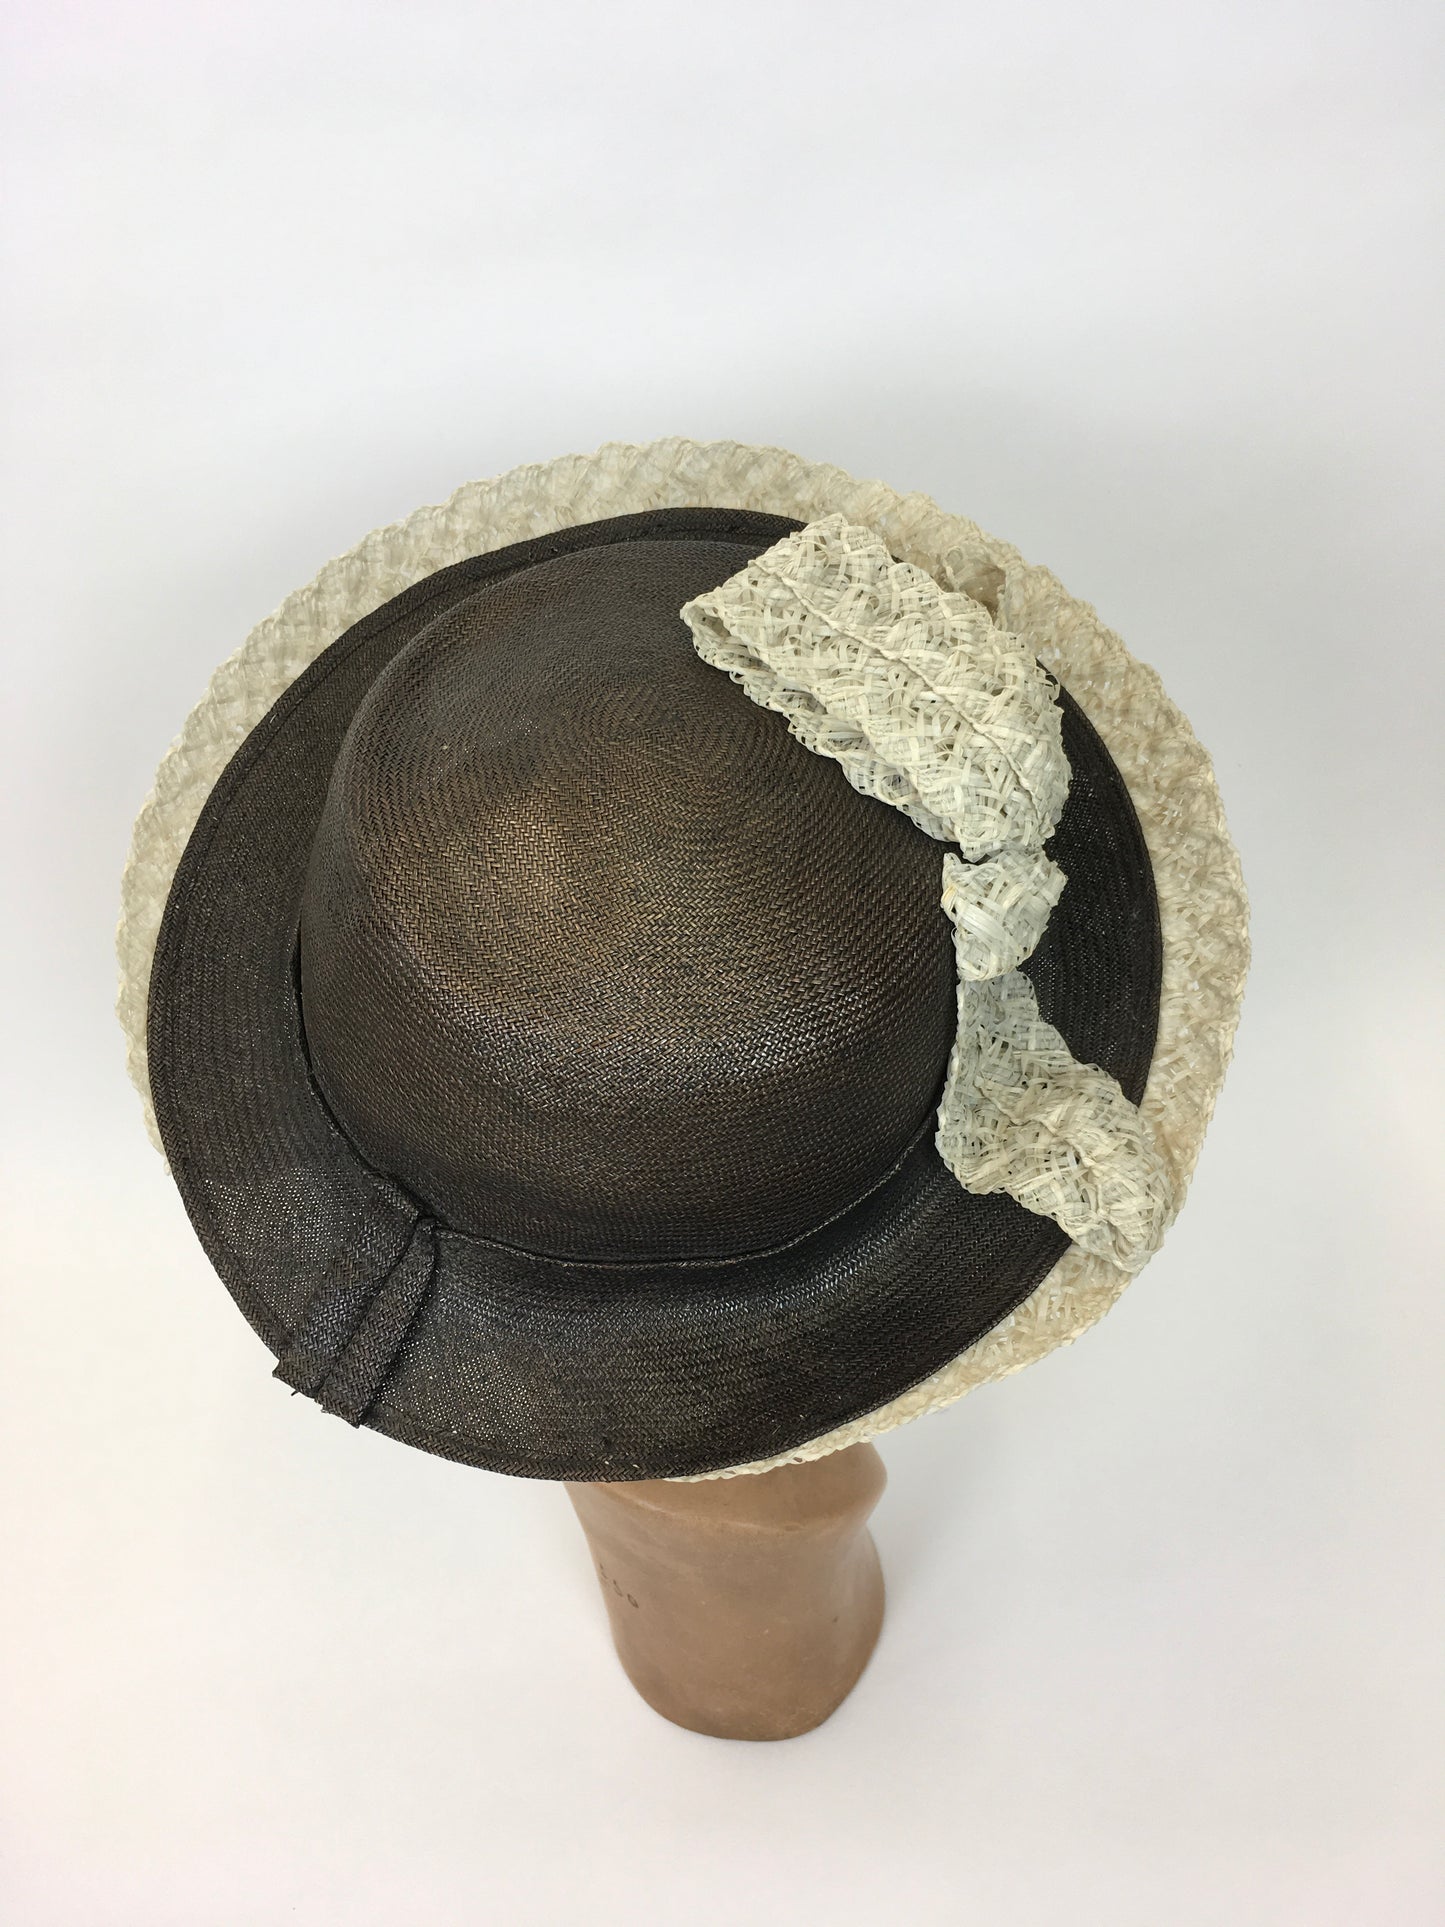 Original 1940’s Brown Grosgrain Topper Hat - With a Fabulous Cream Raffia Trim and Bow Detailing